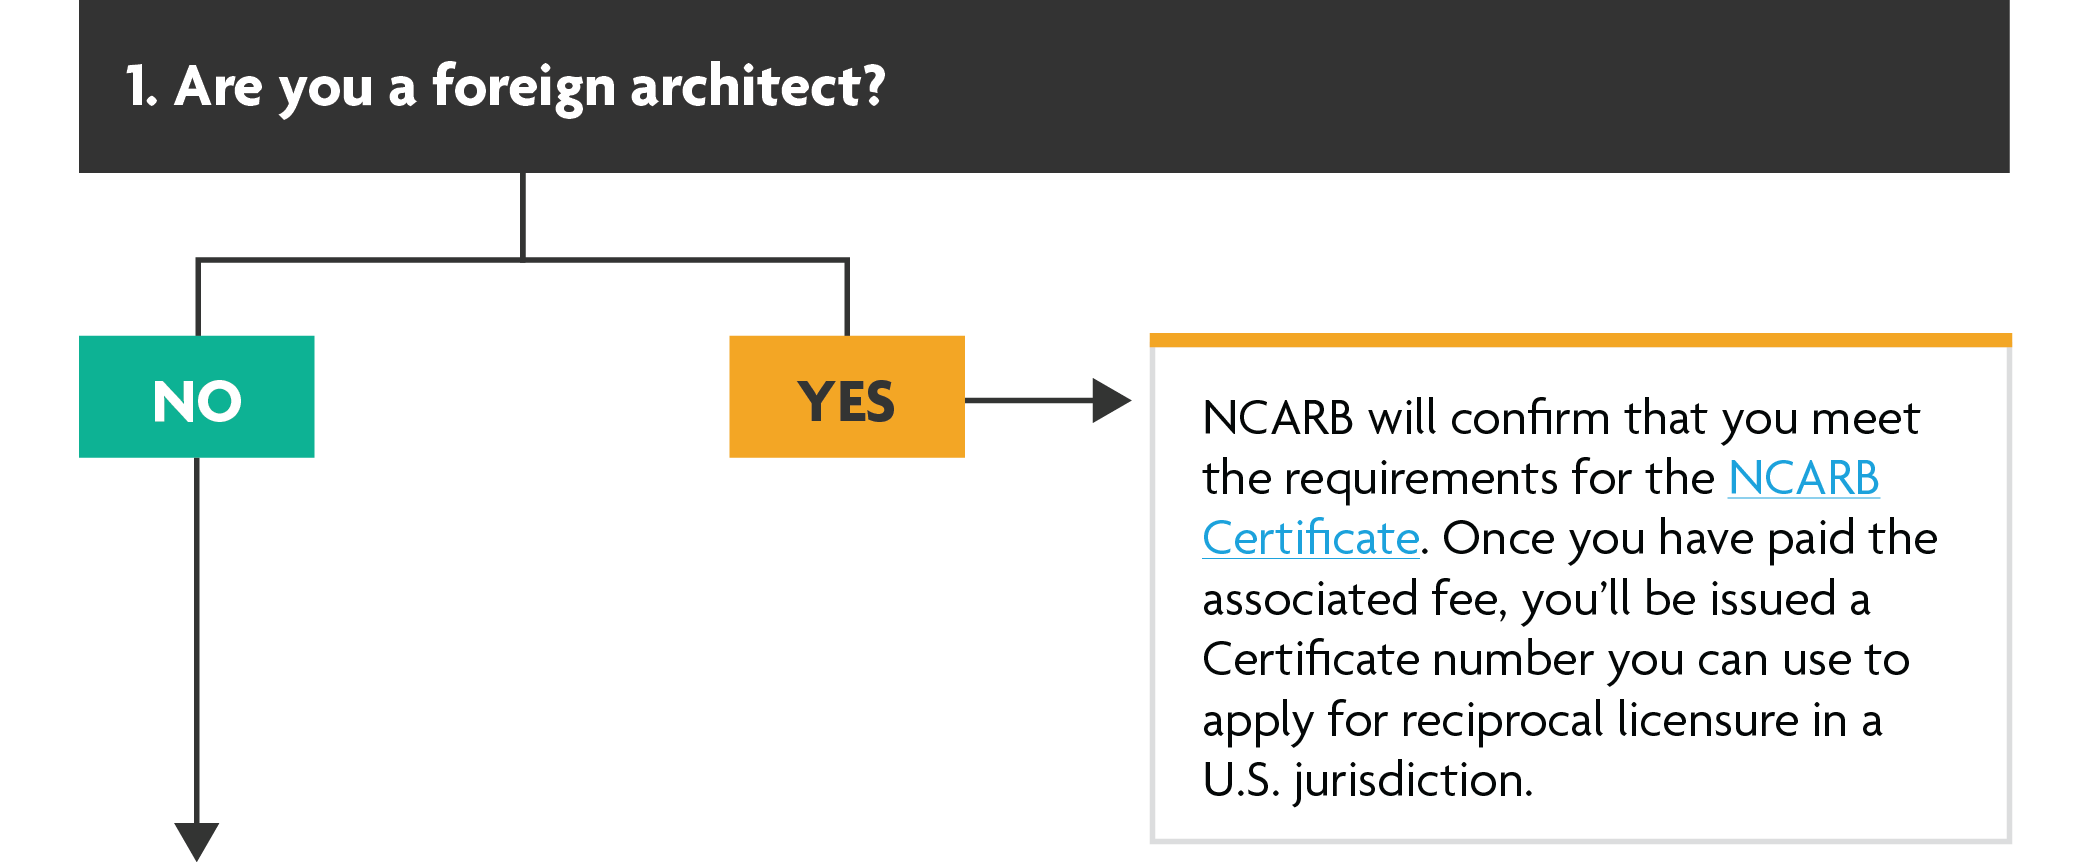 Are you a foreign architect? If no: Move to the next step. If yes: NCARB will confirm that you meet the requirements for the NCARB Certificate. Once you have paid the associated fee, you’ll be issued a Certificate number you can use to apply for reciprocal licensure in a U.S. jurisdiction.